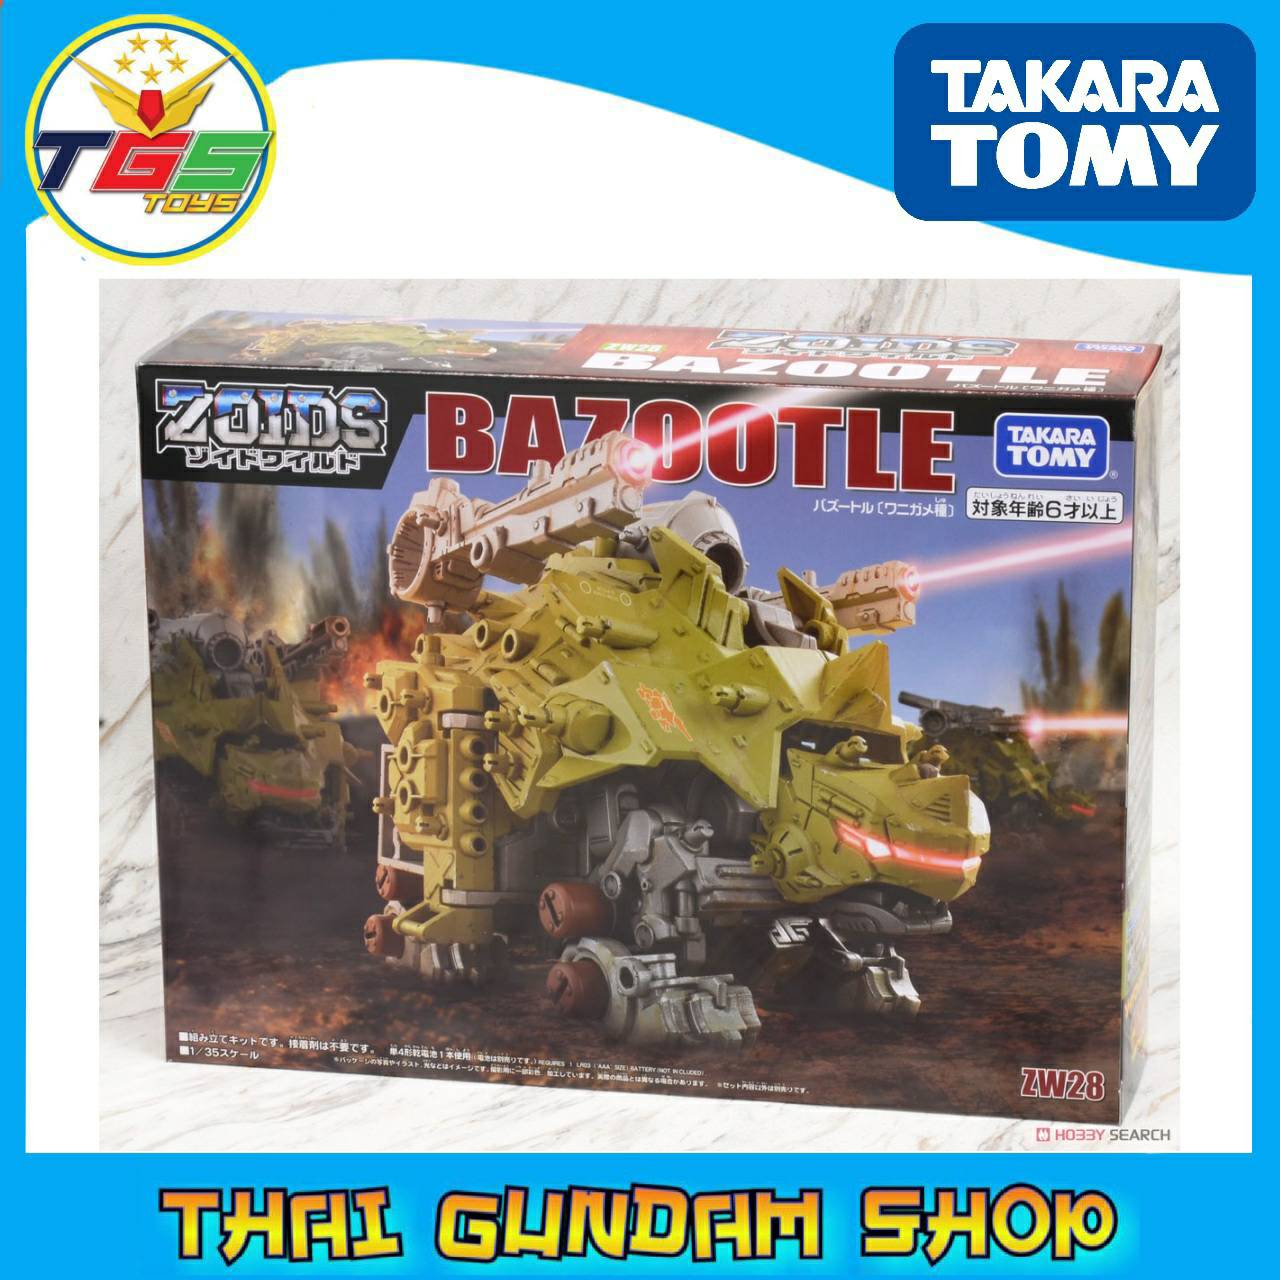 ⭐TGS⭐Zoids Wild ZW28 Bazootle (Character Toy)